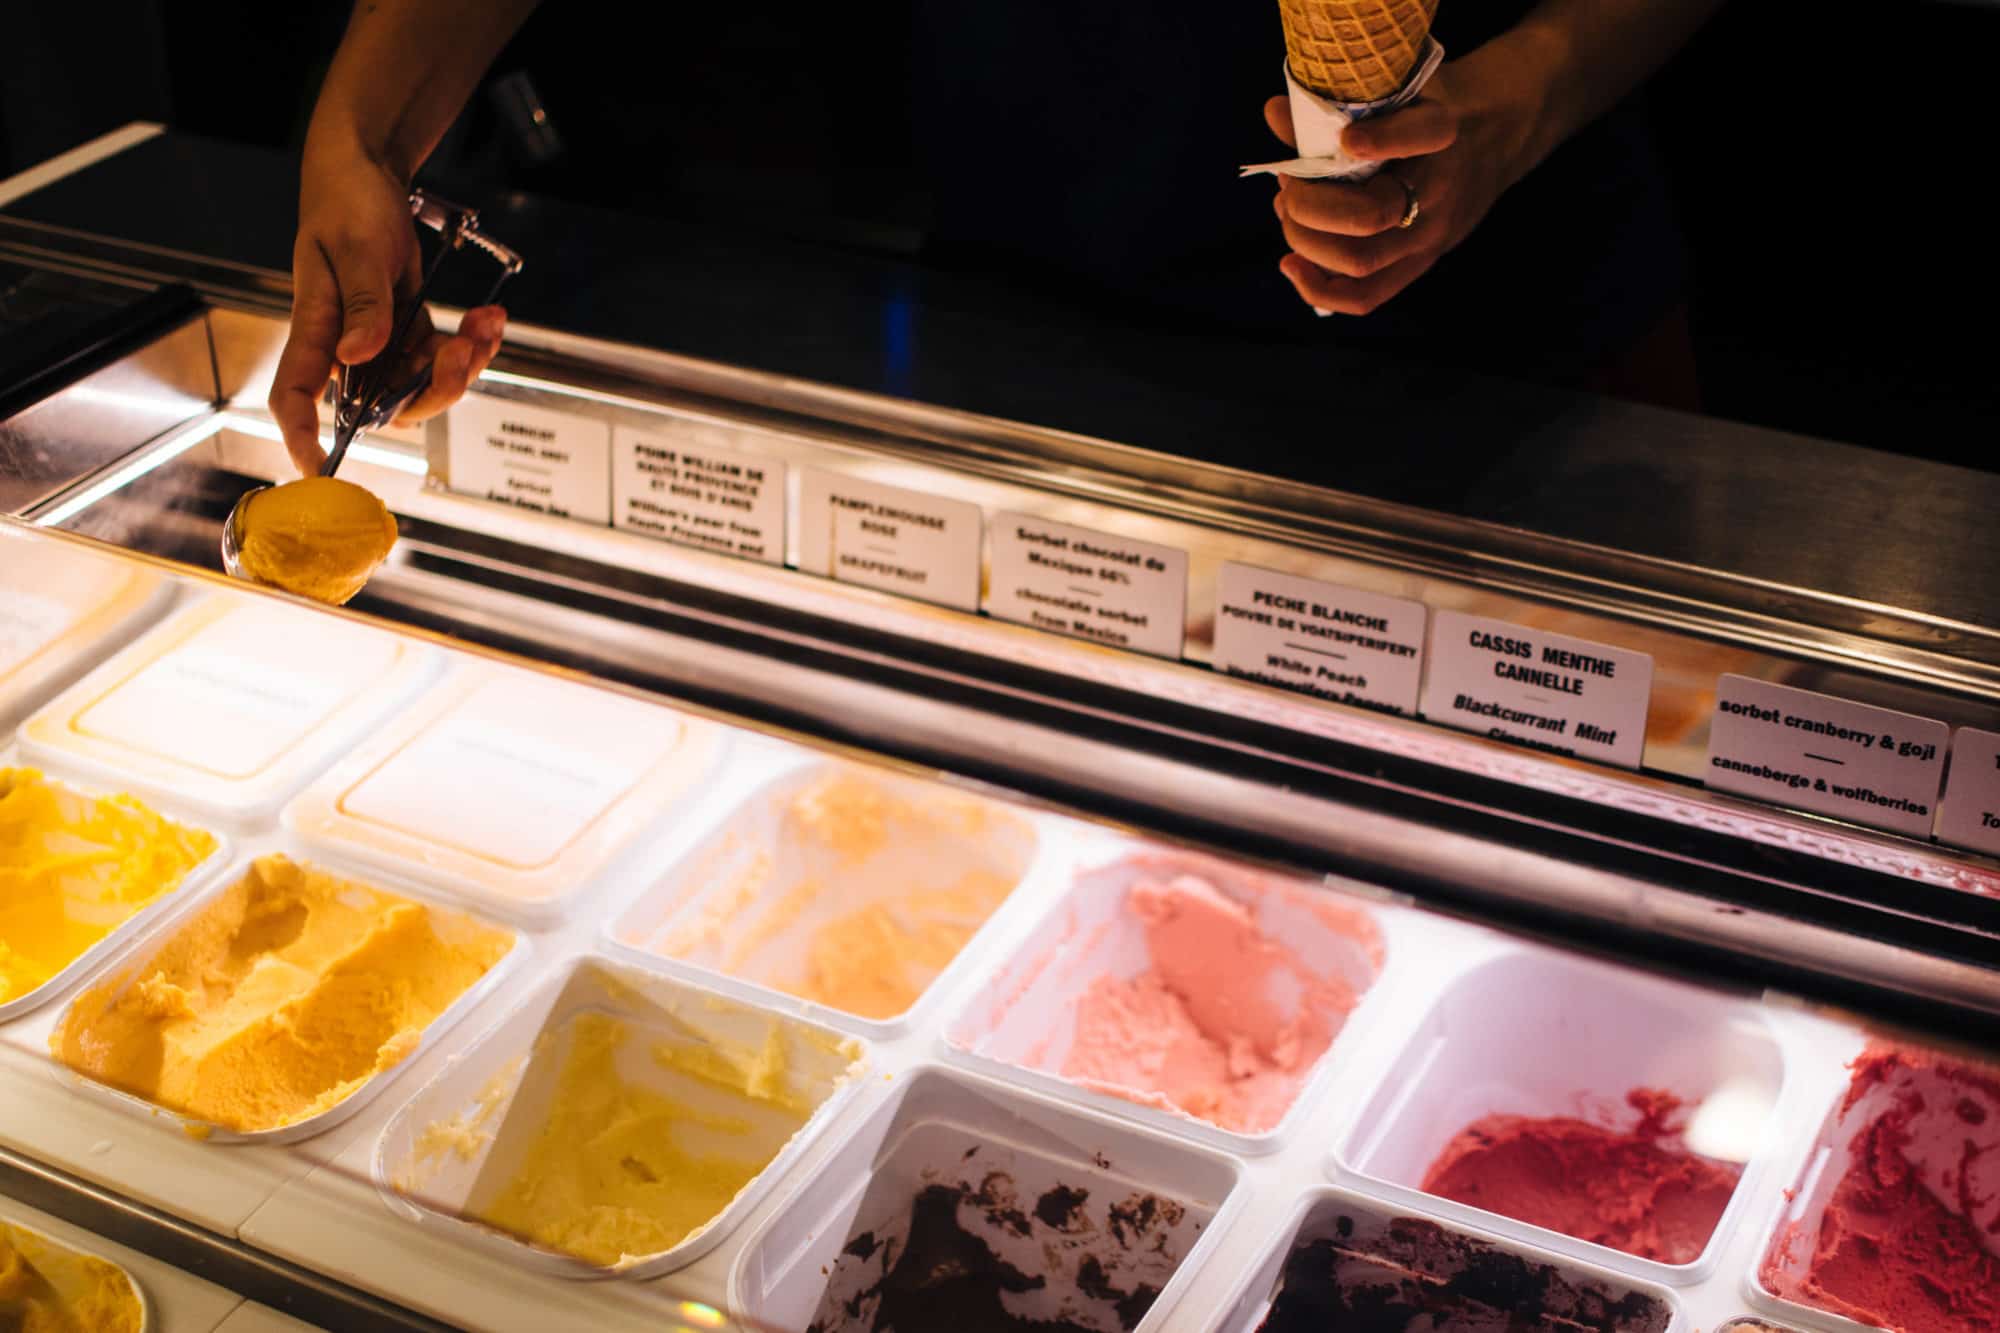 The ice cream counter at Pozzeto ice cream shop in Paris with a vendor scooping out the flavors into a cone.